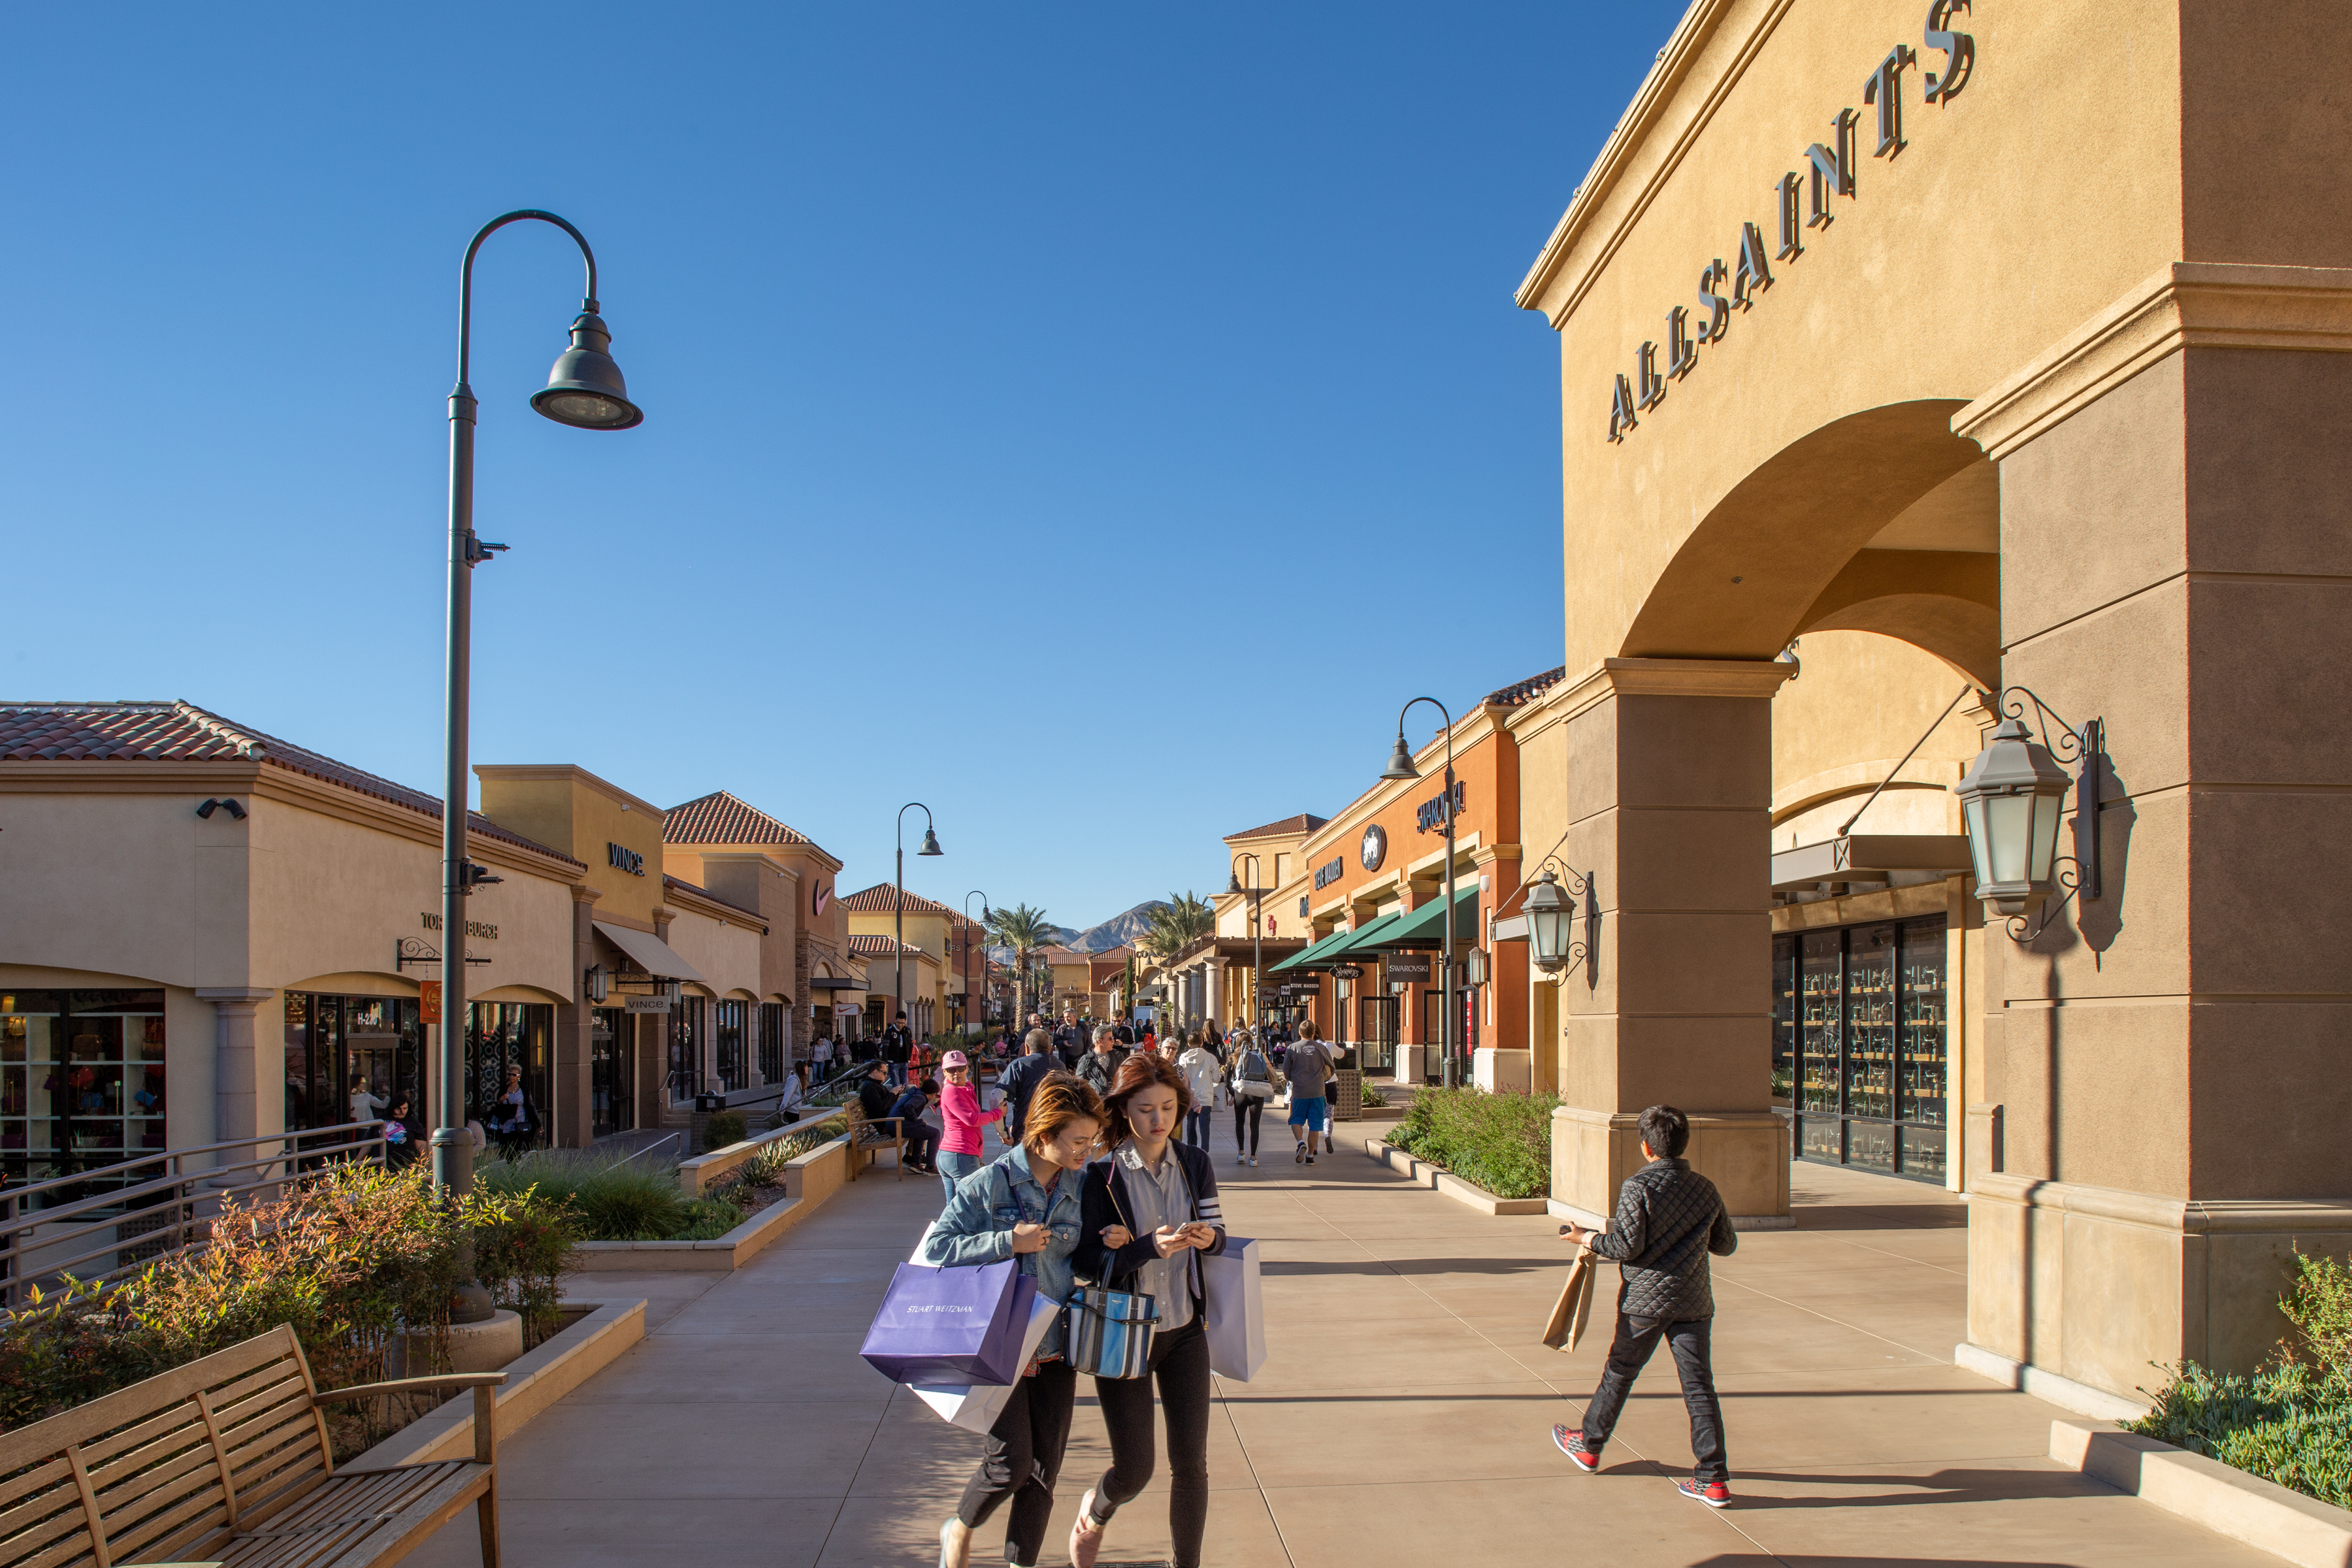 Solstice Sunglass Outlet at Desert Hills Premium Outlets® - A Shopping  Center in Cabazon, CA - A Simon Property